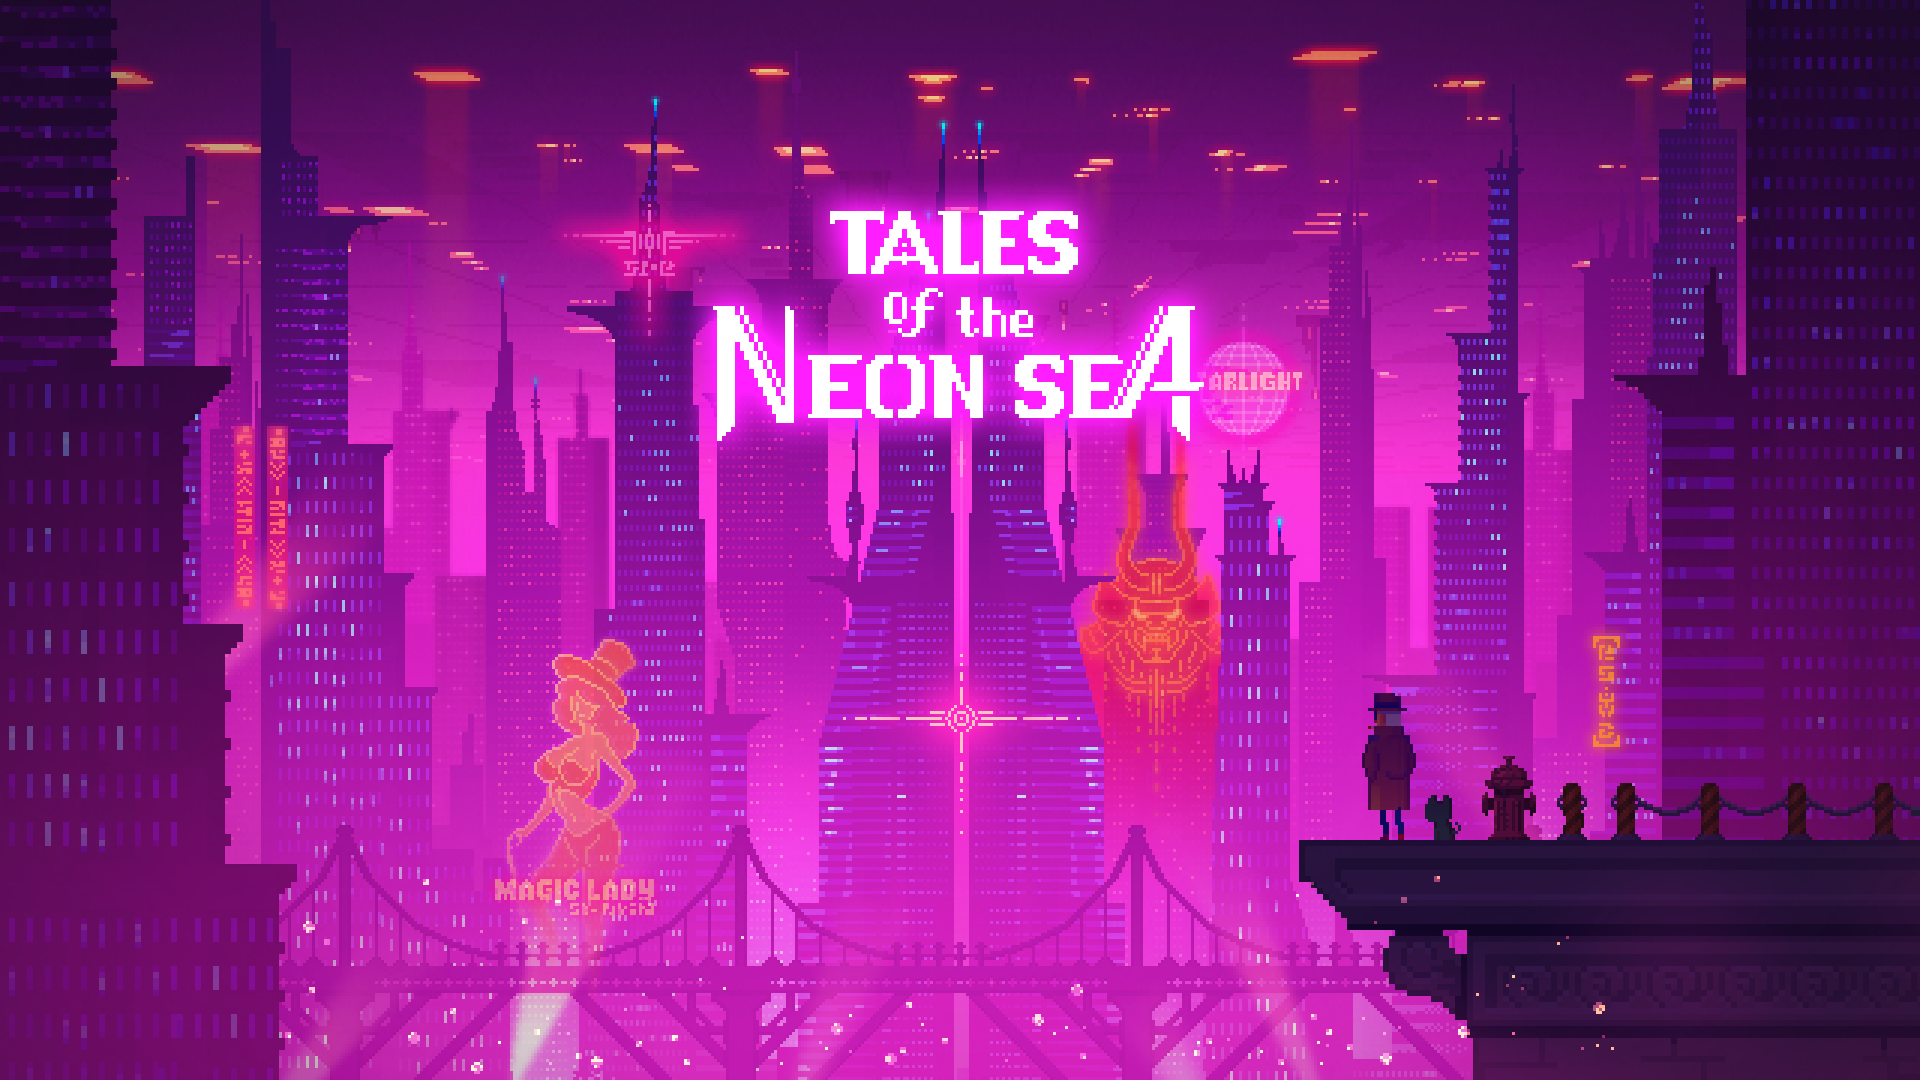 video-game-tales-of-the-neon-sea-hd-wallpaper-background-image